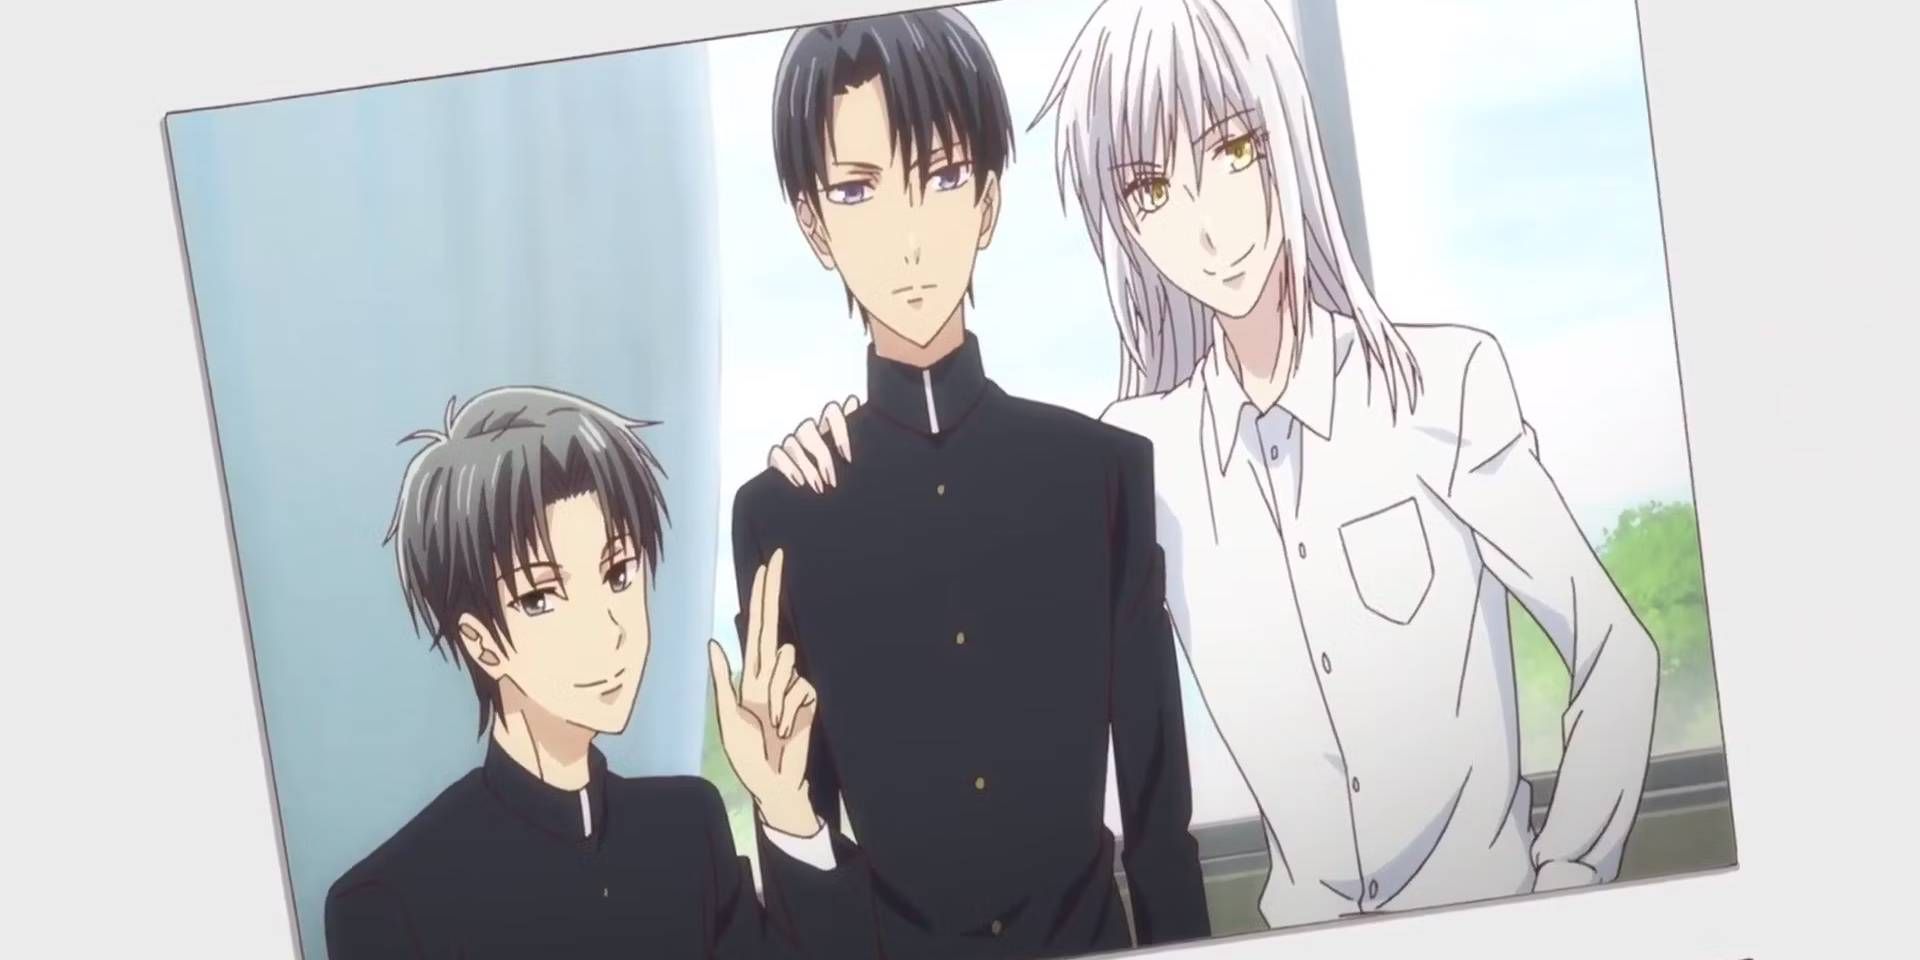 Ayame, Hatori, and Shigure Sohma pose for a photo in middle school (Fruits Basket)